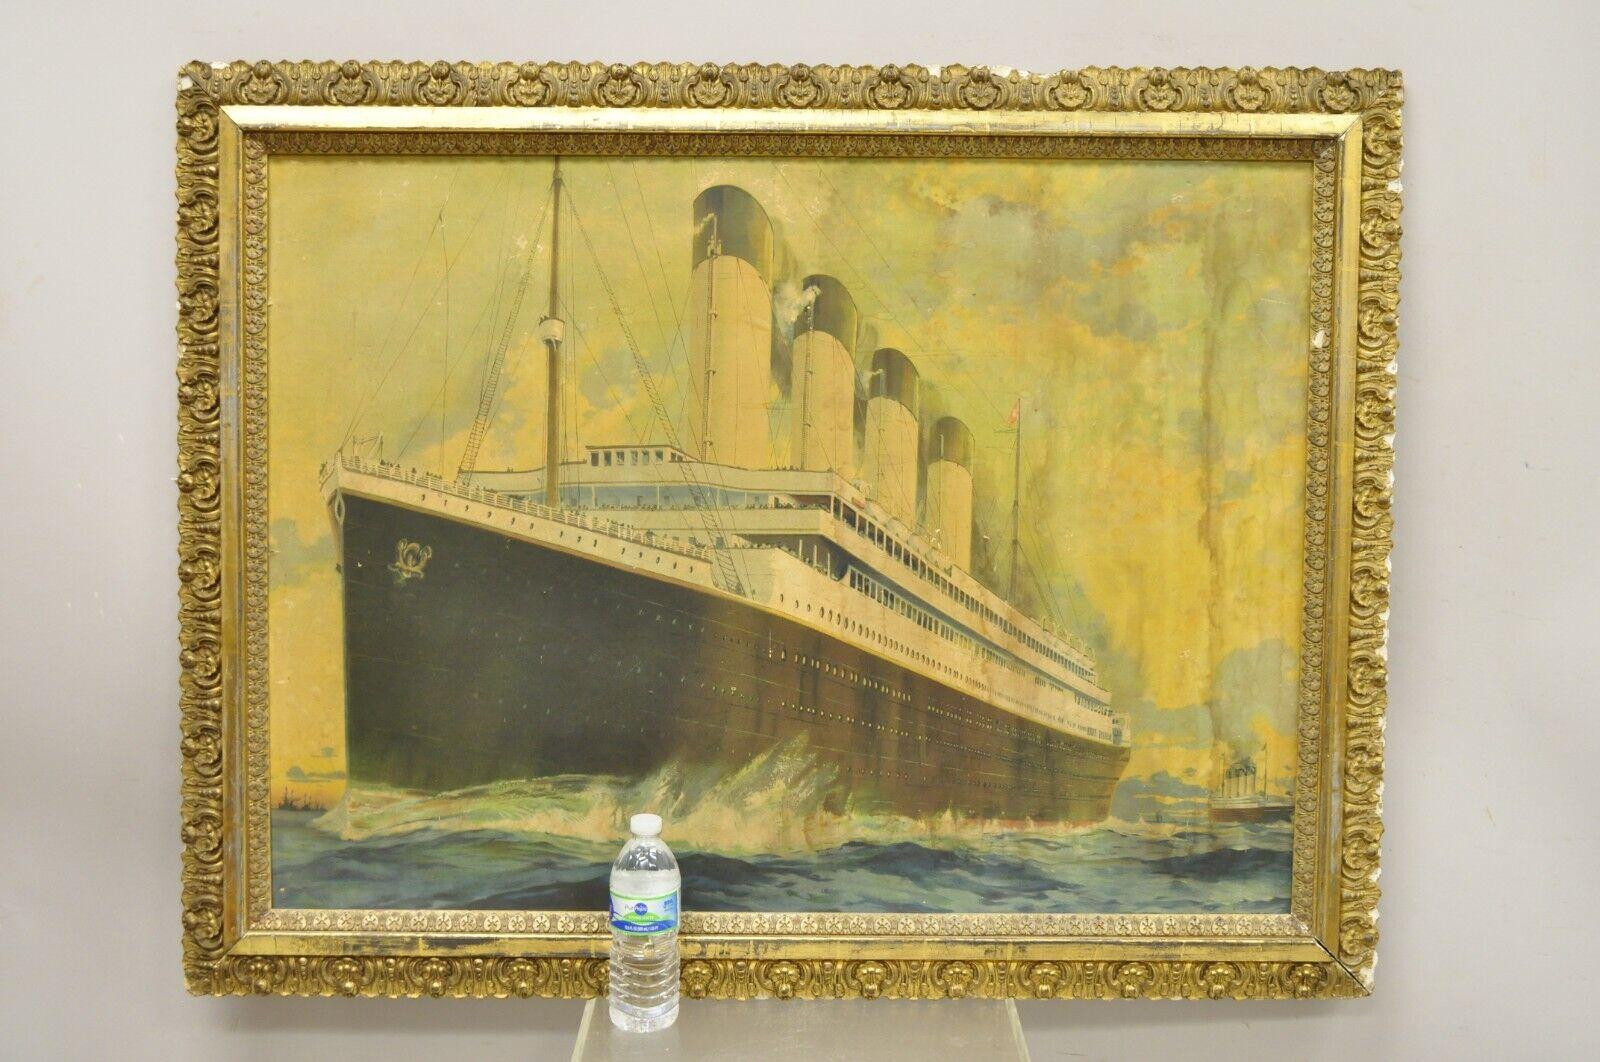 Large antique Poster/Print after Montague Birrell black (1884-1964) white star Line plympic and Titanic 1910 print. Item features antique print on board. Gold giltwood gesso frame, image of the Olympic and the Titanic passing at sea (the Titanic in